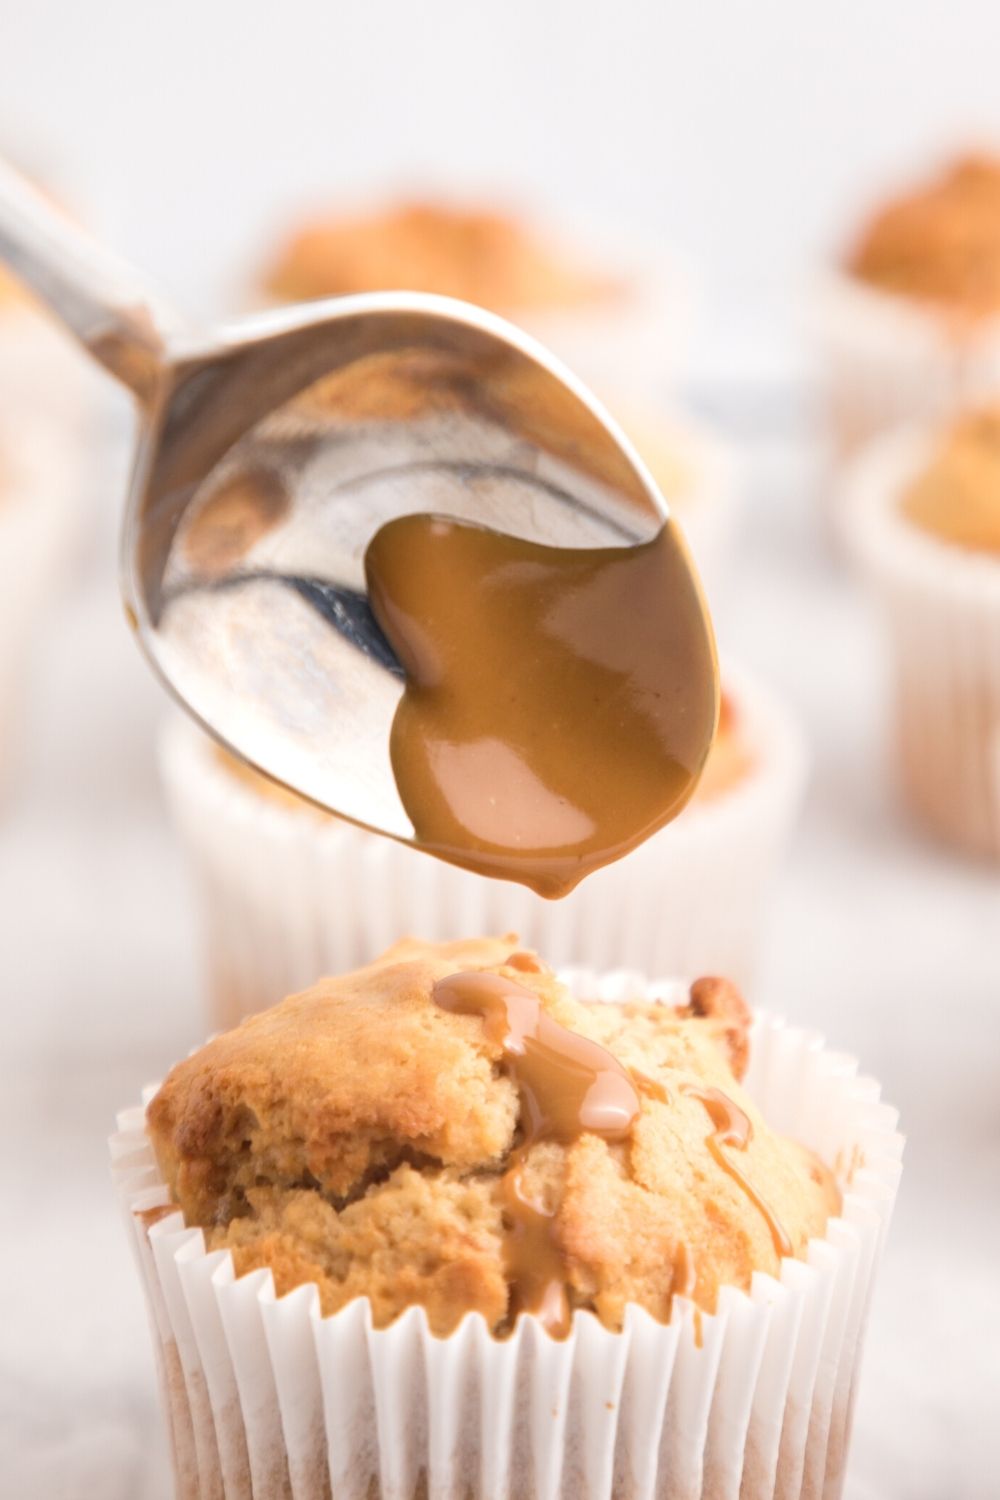 melted Lotus Biscoff cookie butter being drizzled over a muffin